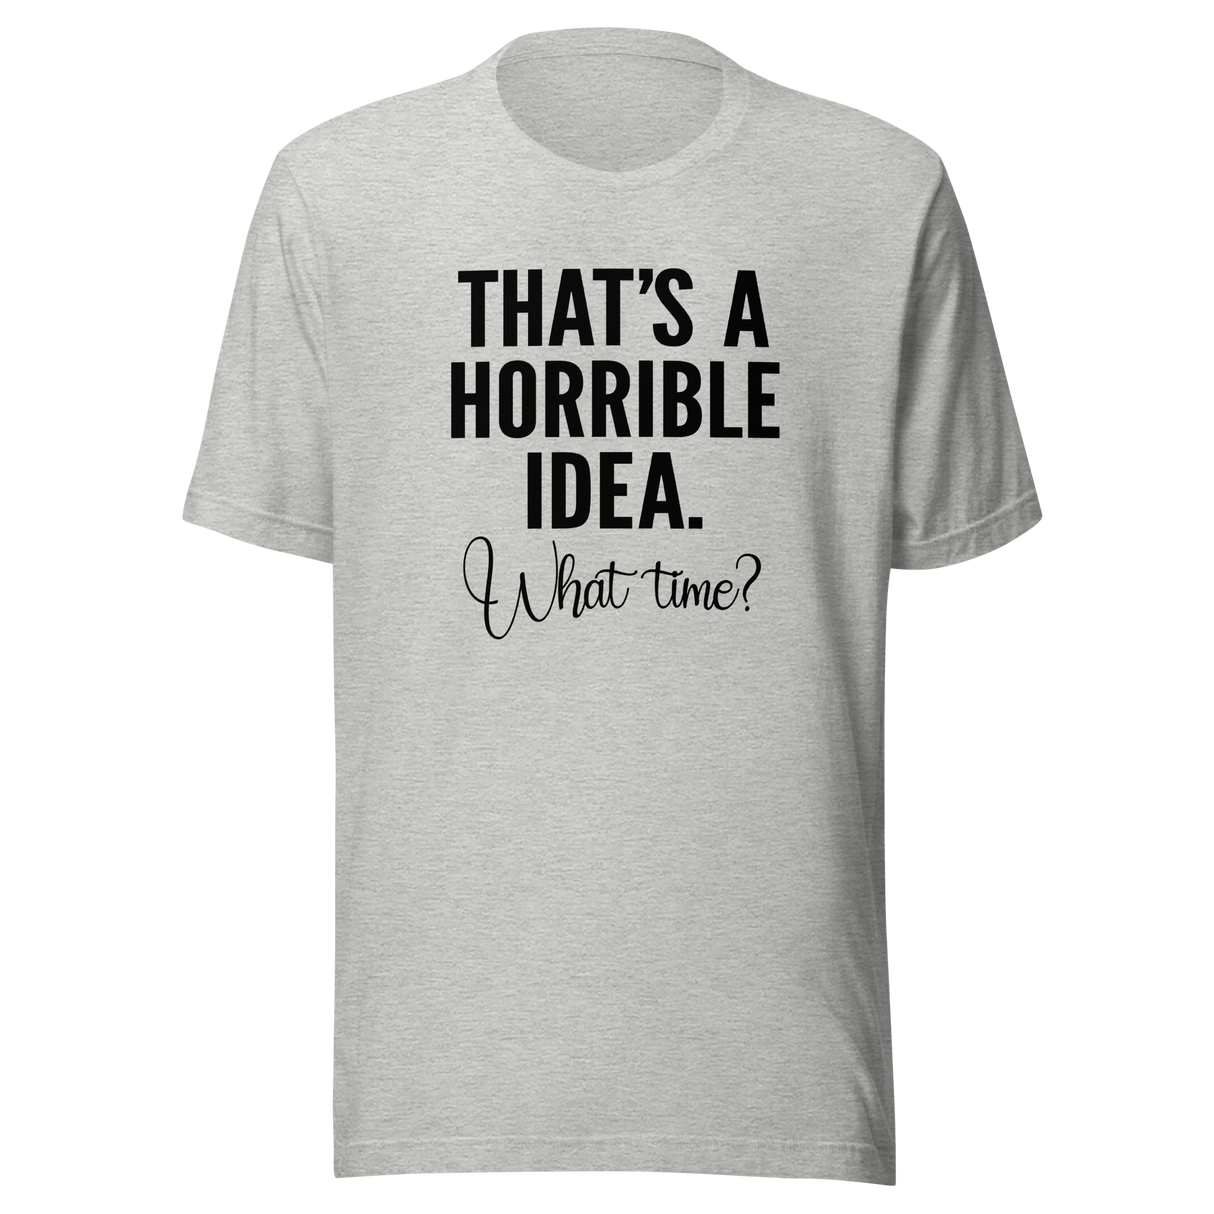 thats-a-horrible-idea-what-time-horrible-tee-idea-t-shirt-text-only-tee-funny-t-shirt-life-tee#color_athletic-heather